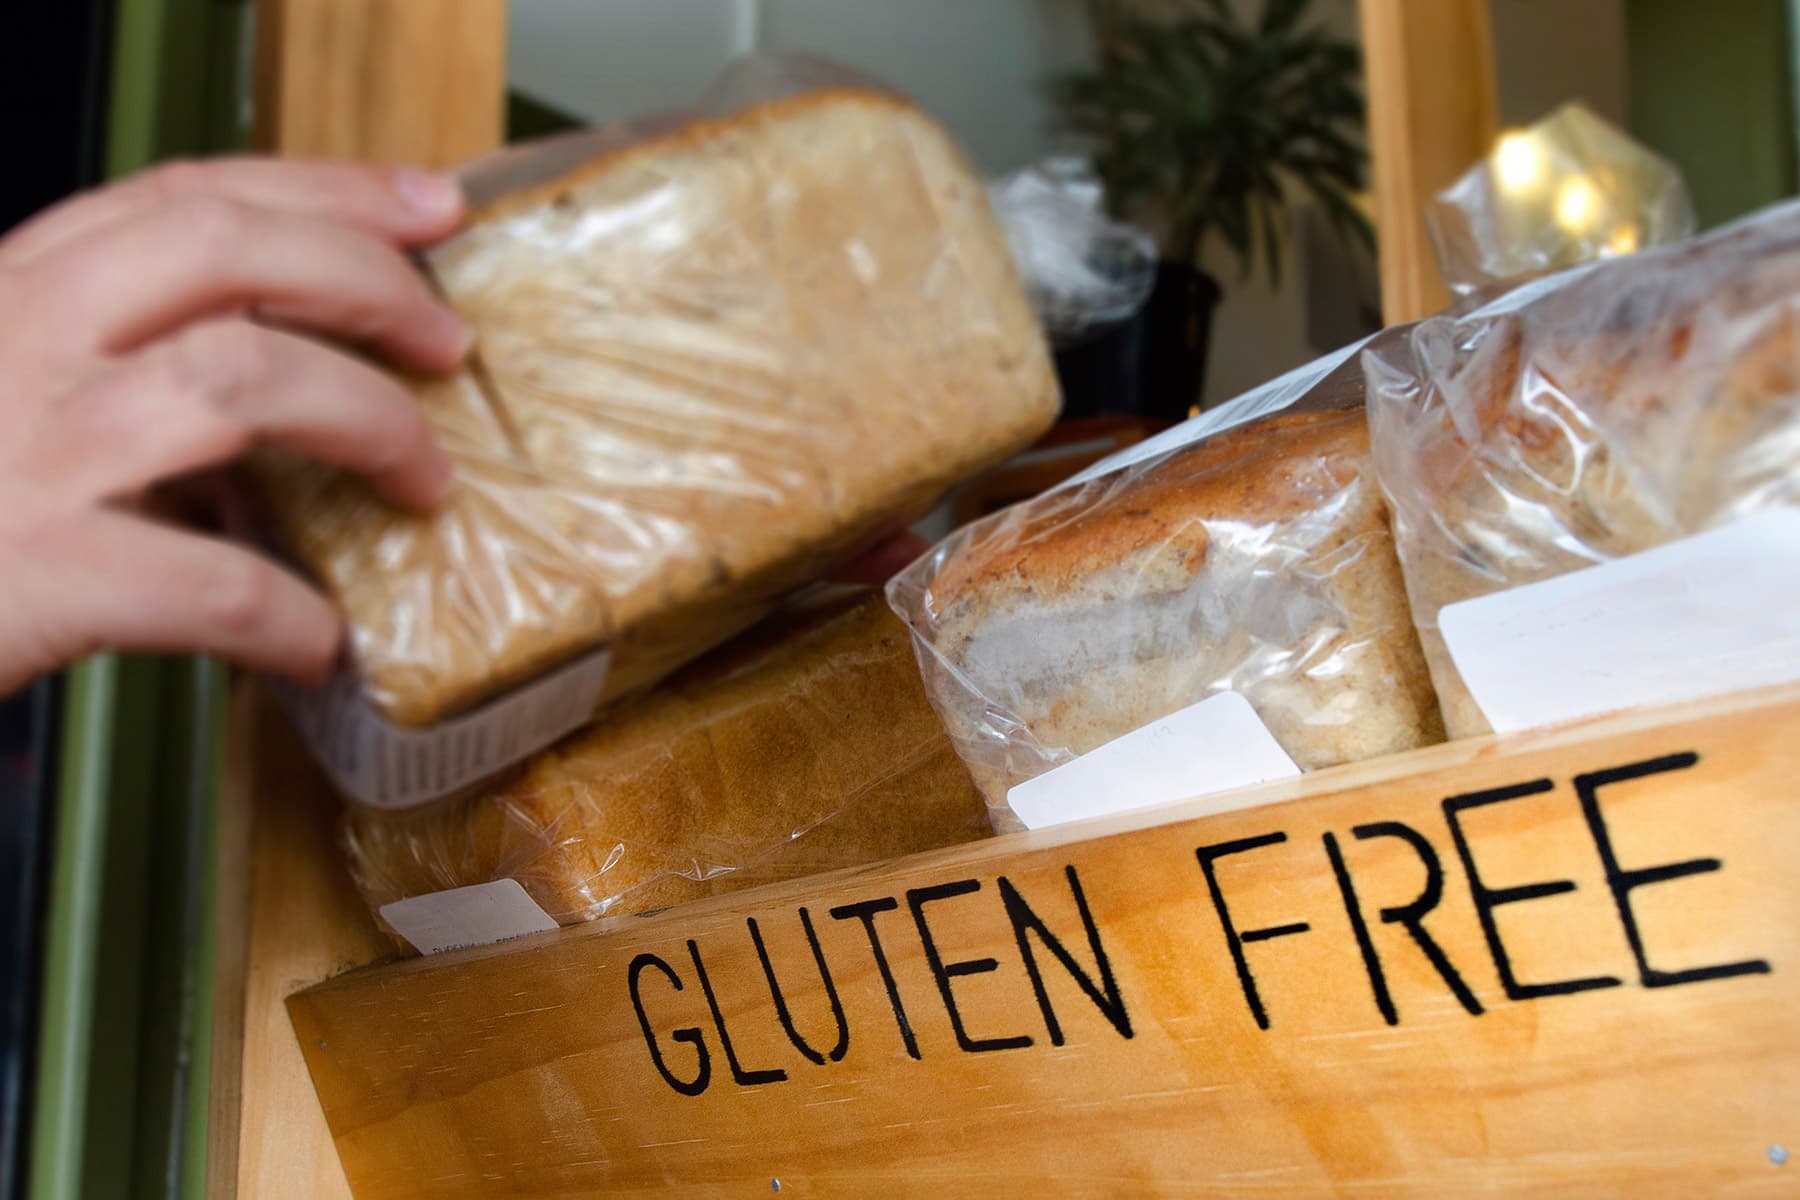 Have Celiac Disease? You May Need Screening for Other Disorders